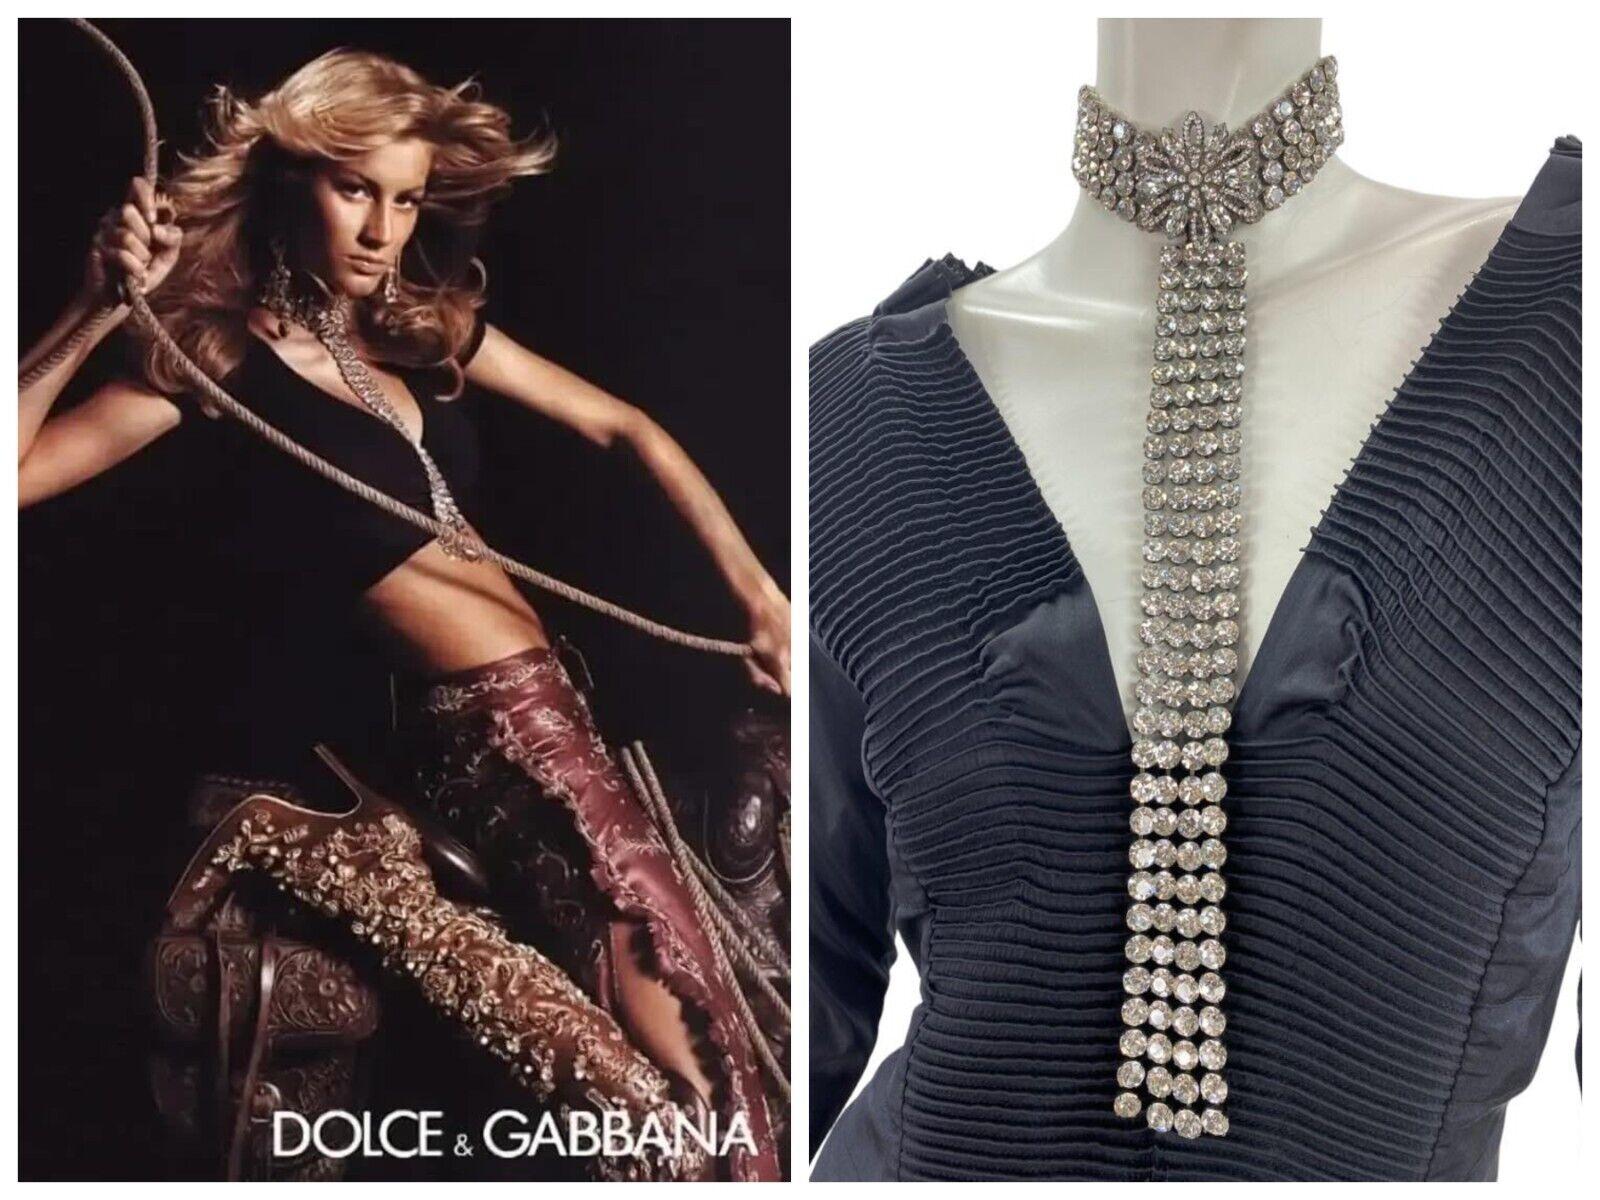 Women's Iconic Vintage 2001 Dolce & Gabbana Crystal Choker Lariant Necklace For Sale